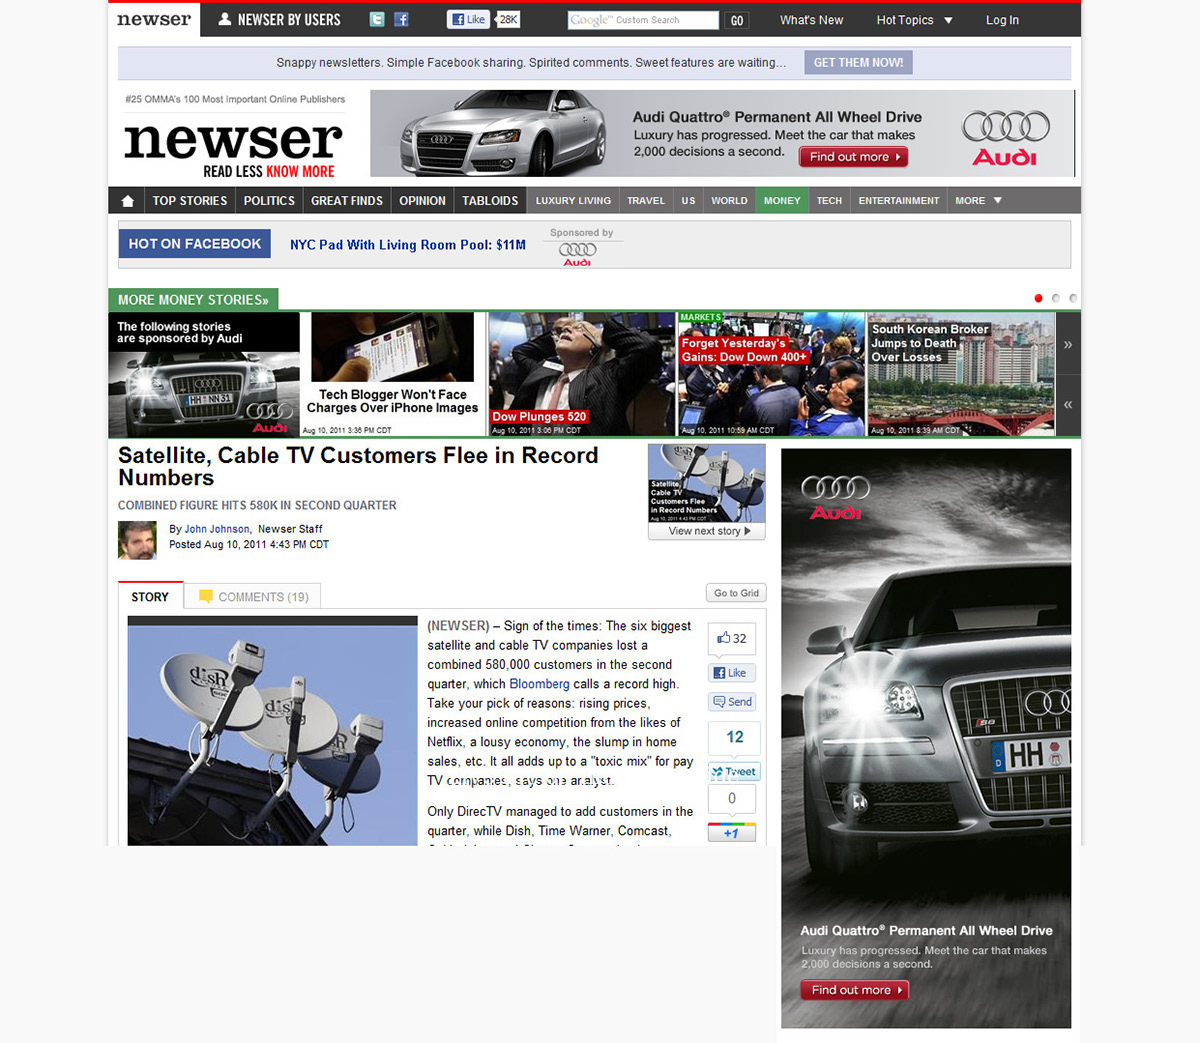 news corporation campaigns golf tv shows Audi mobile android Monster.com politics banners Rich media ads roadblocks Front Door